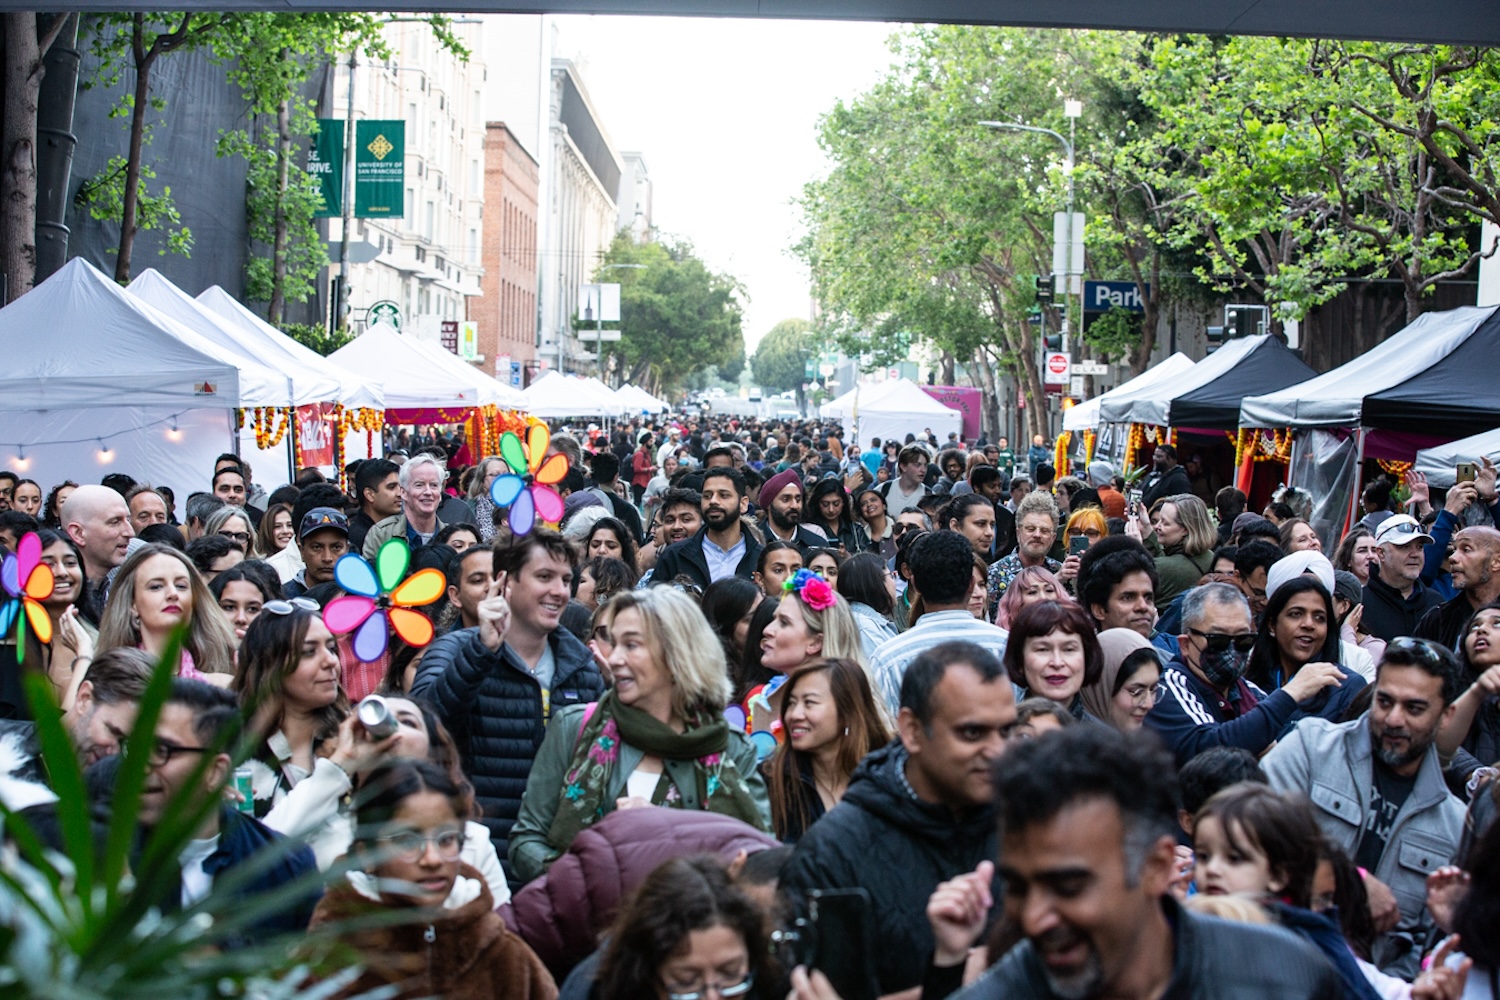 The packed streets of San Francisco's Financial District during May's Bhangra & Beats